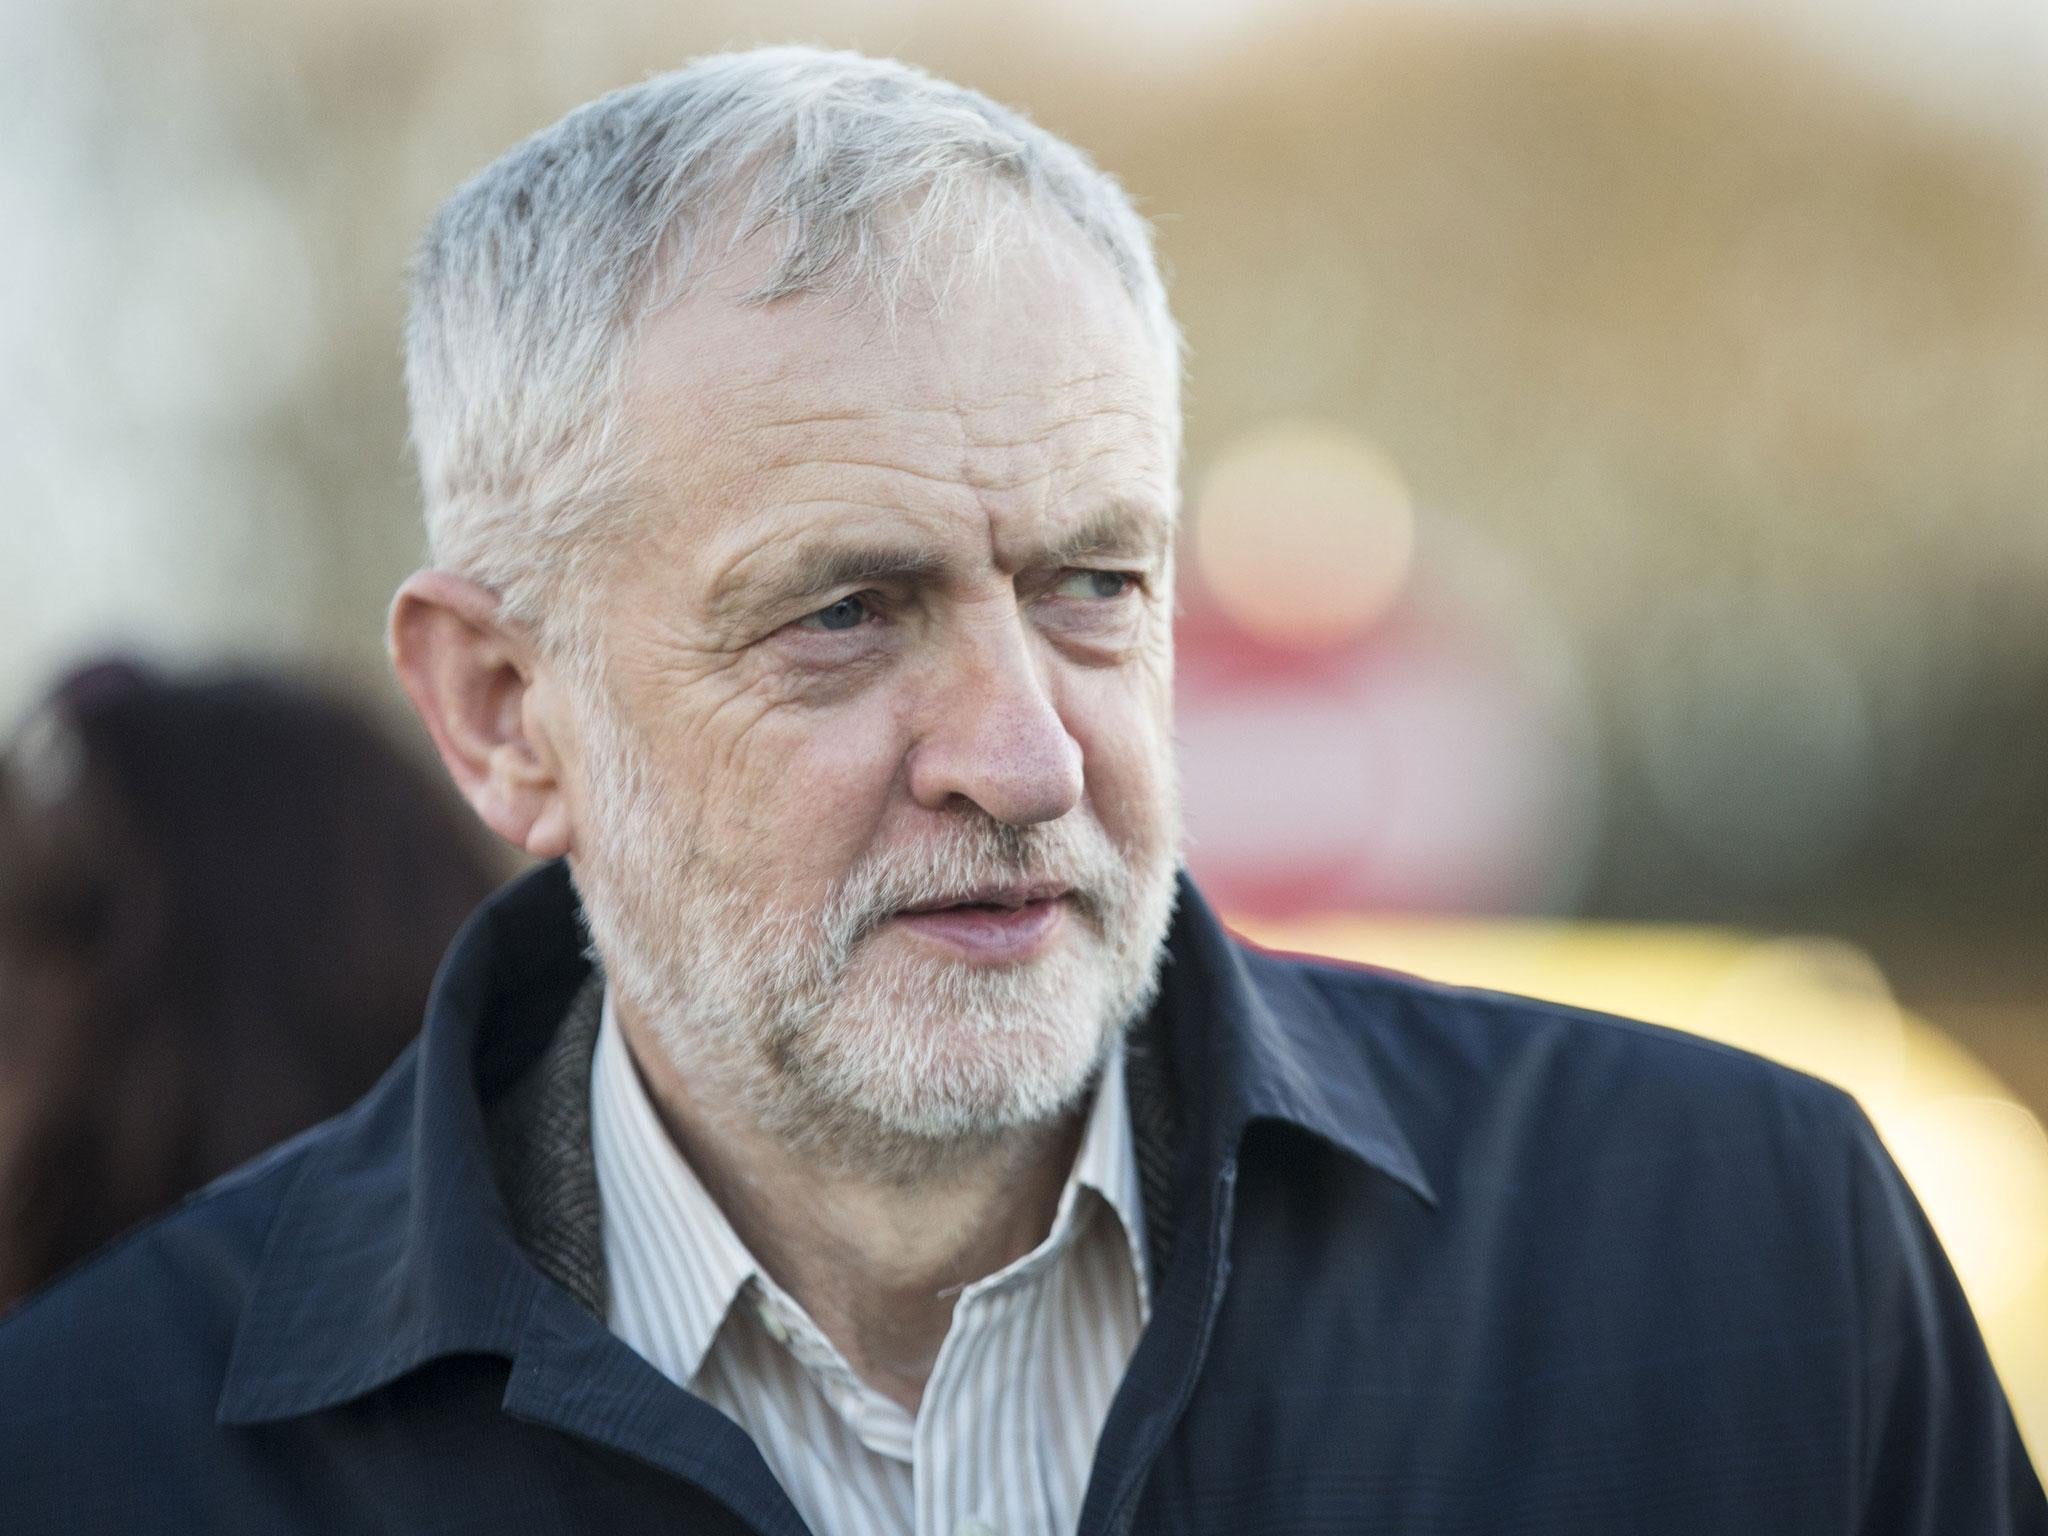 The latest blow to Corbyn’s leadership follows the resignation of four shadow Cabinet ministers